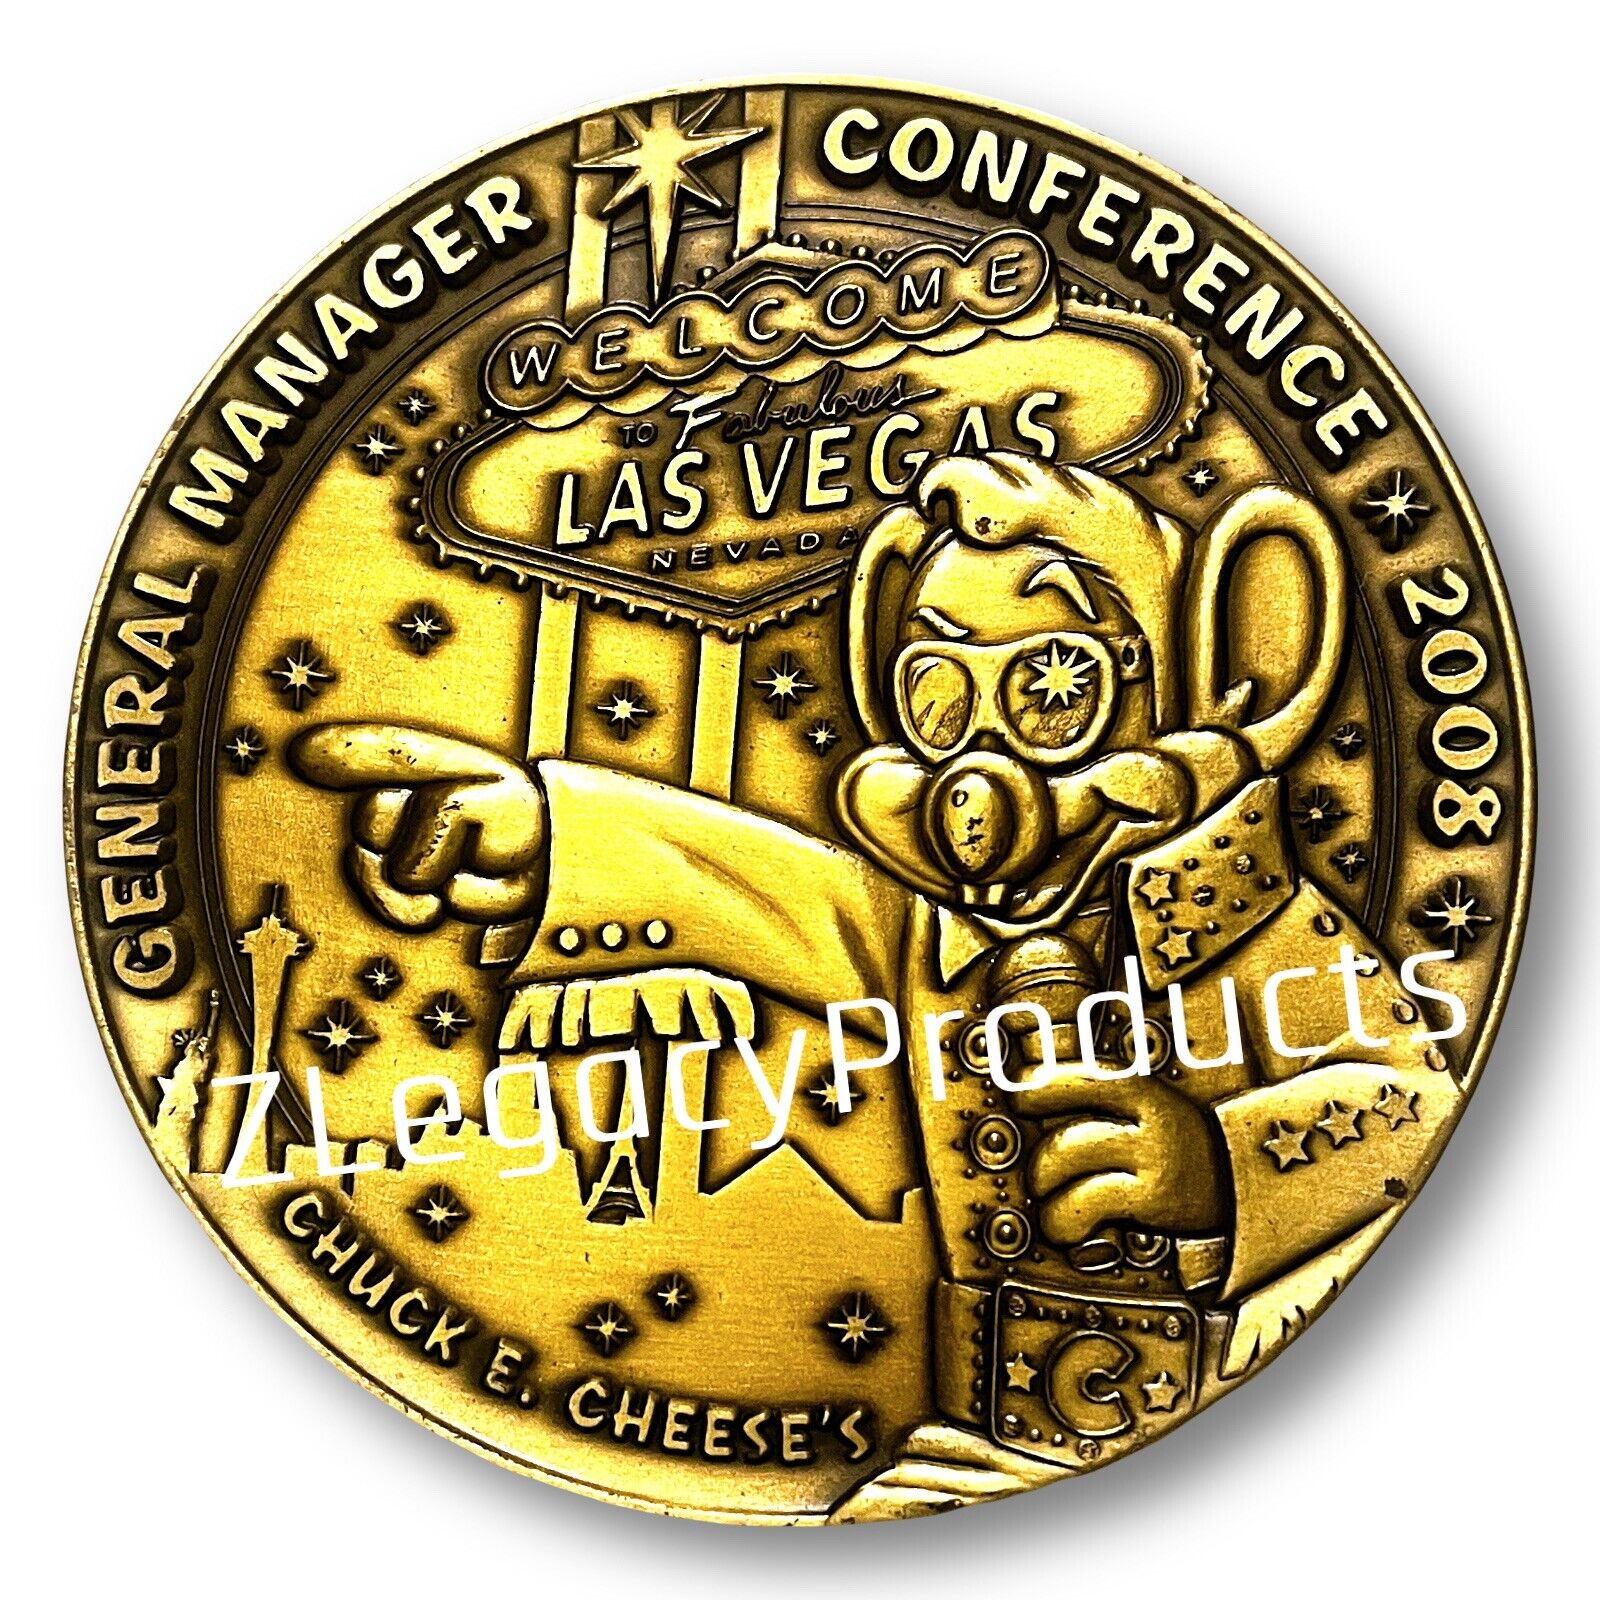 🌟VERY RARE 2008 Chuck E Cheese General Manager Las Vegas Conference Medallion🌟